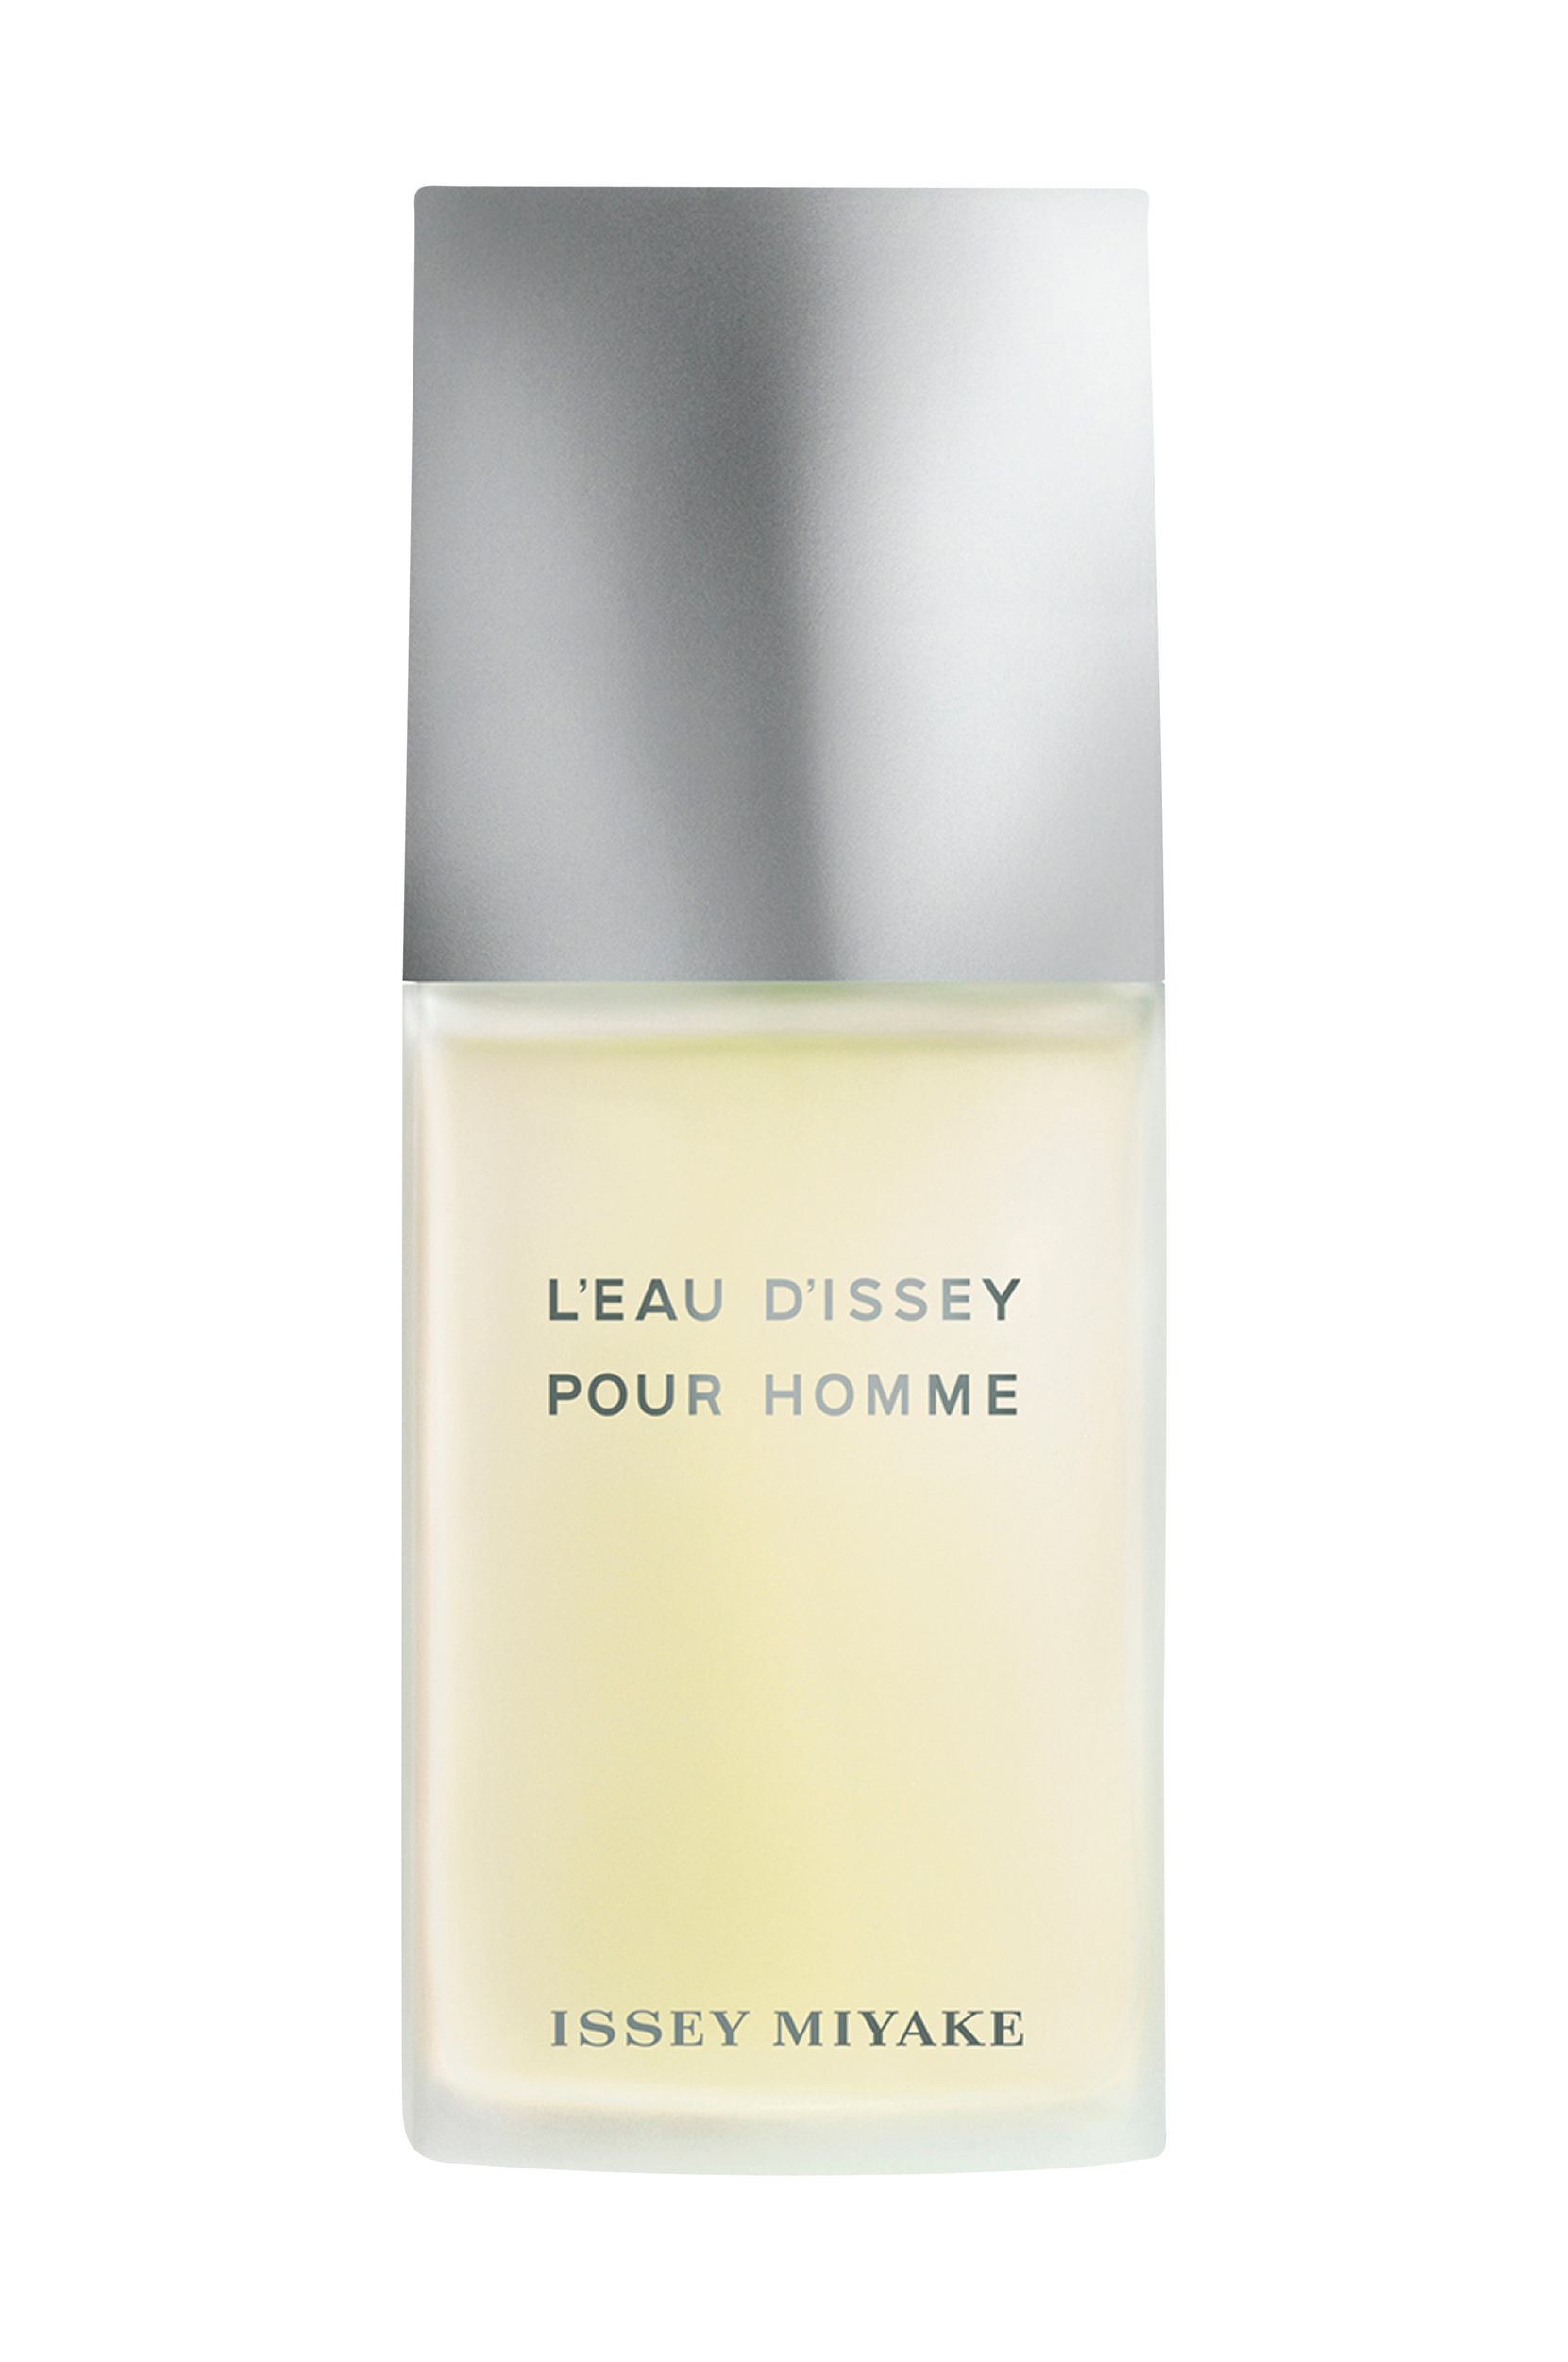 L'eau D'issey Pour Homme Edt 75 ml, Issey Miyake